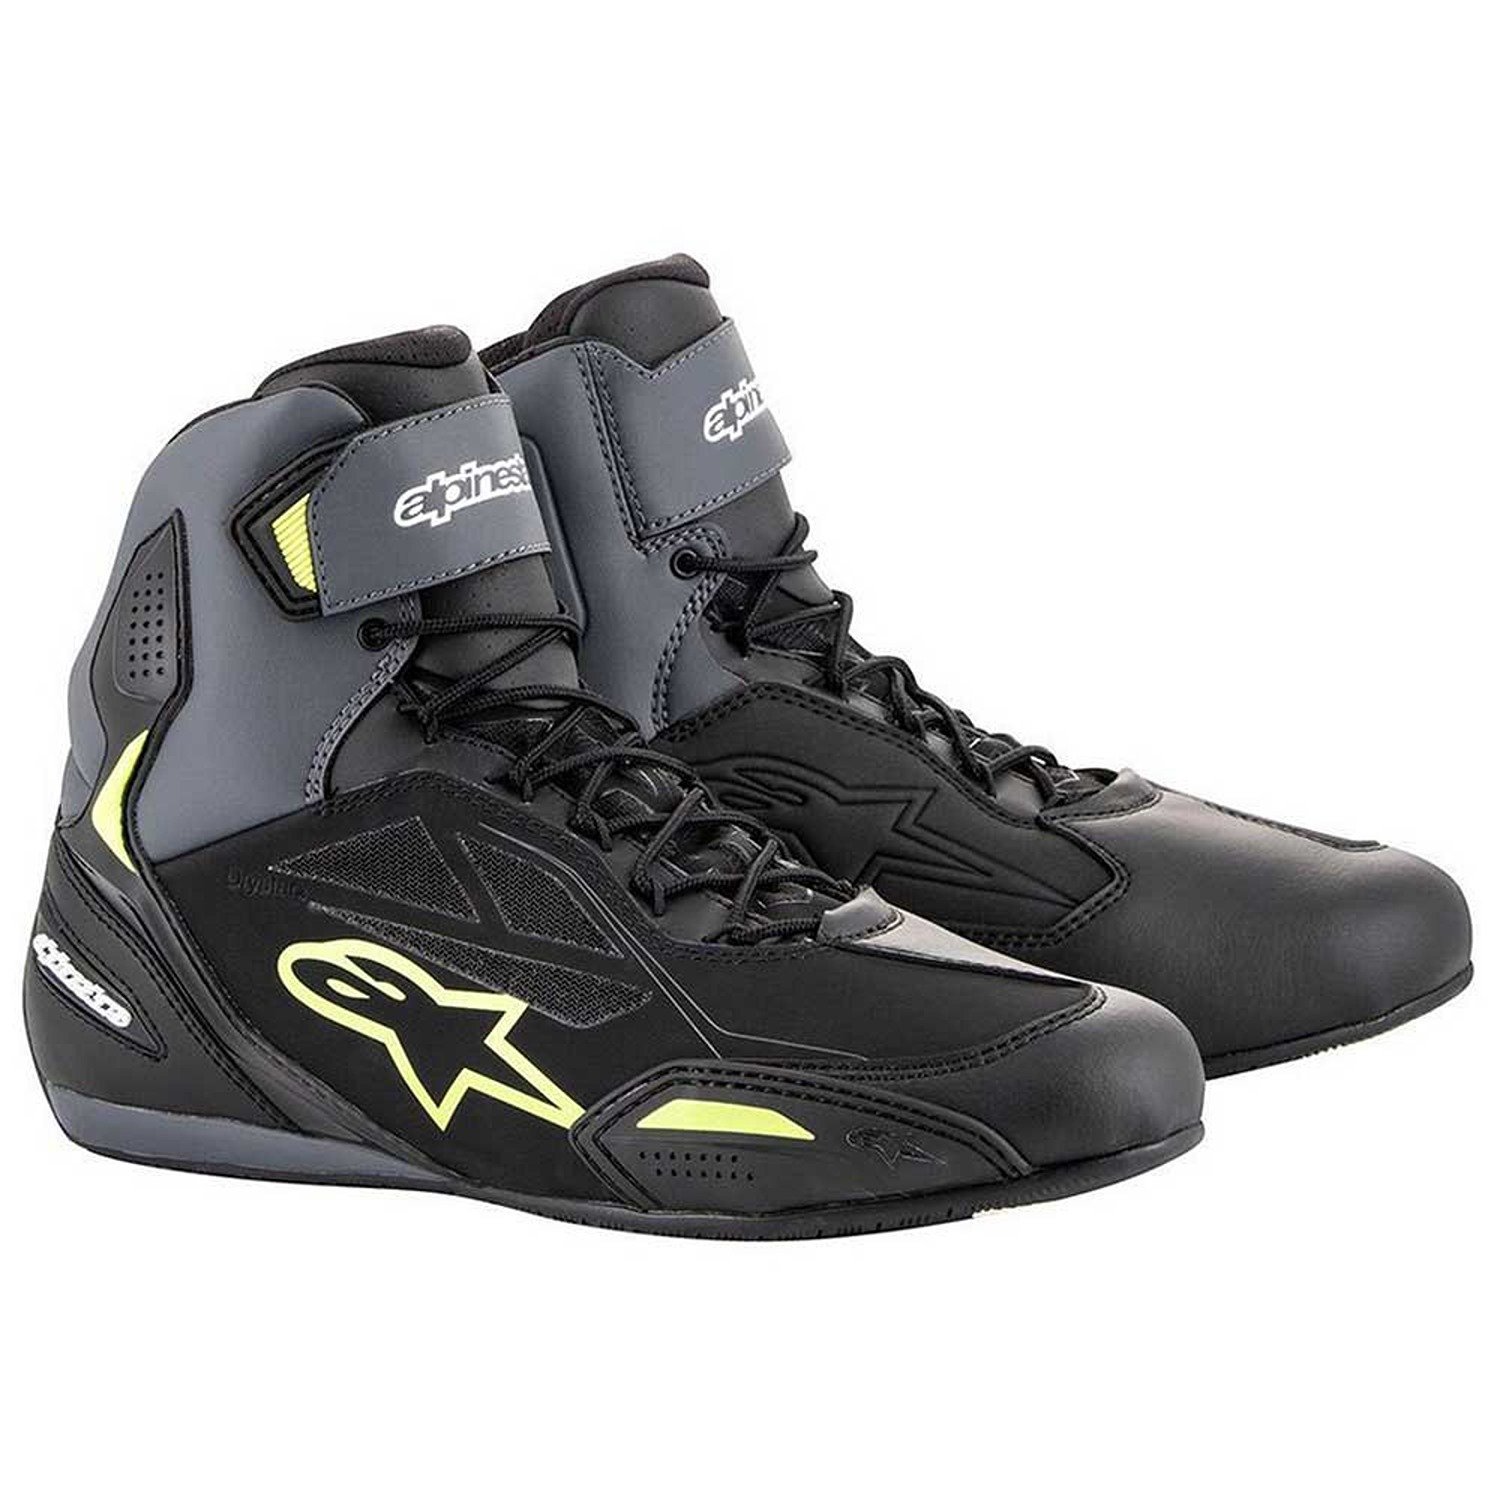 Image of Alpinestars Faster-3 Shoes Black Yellow Fluo Talla US 12